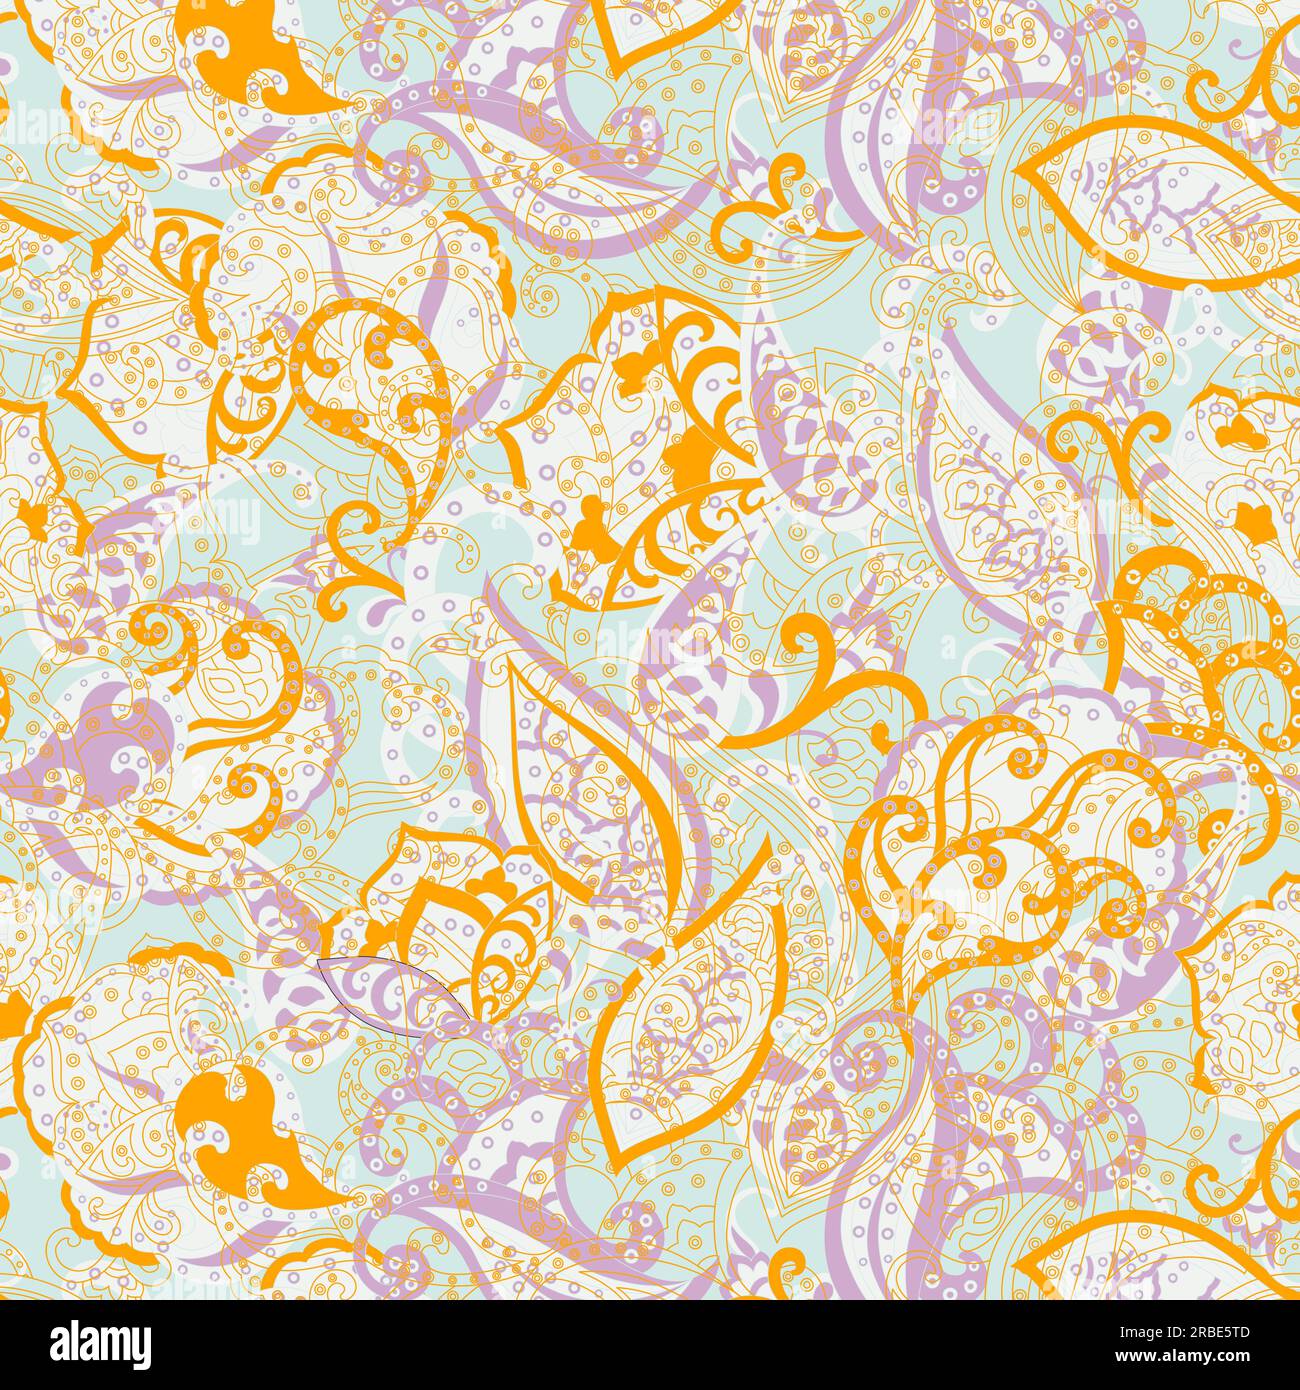 Paisley: The story of a classic bohemian print